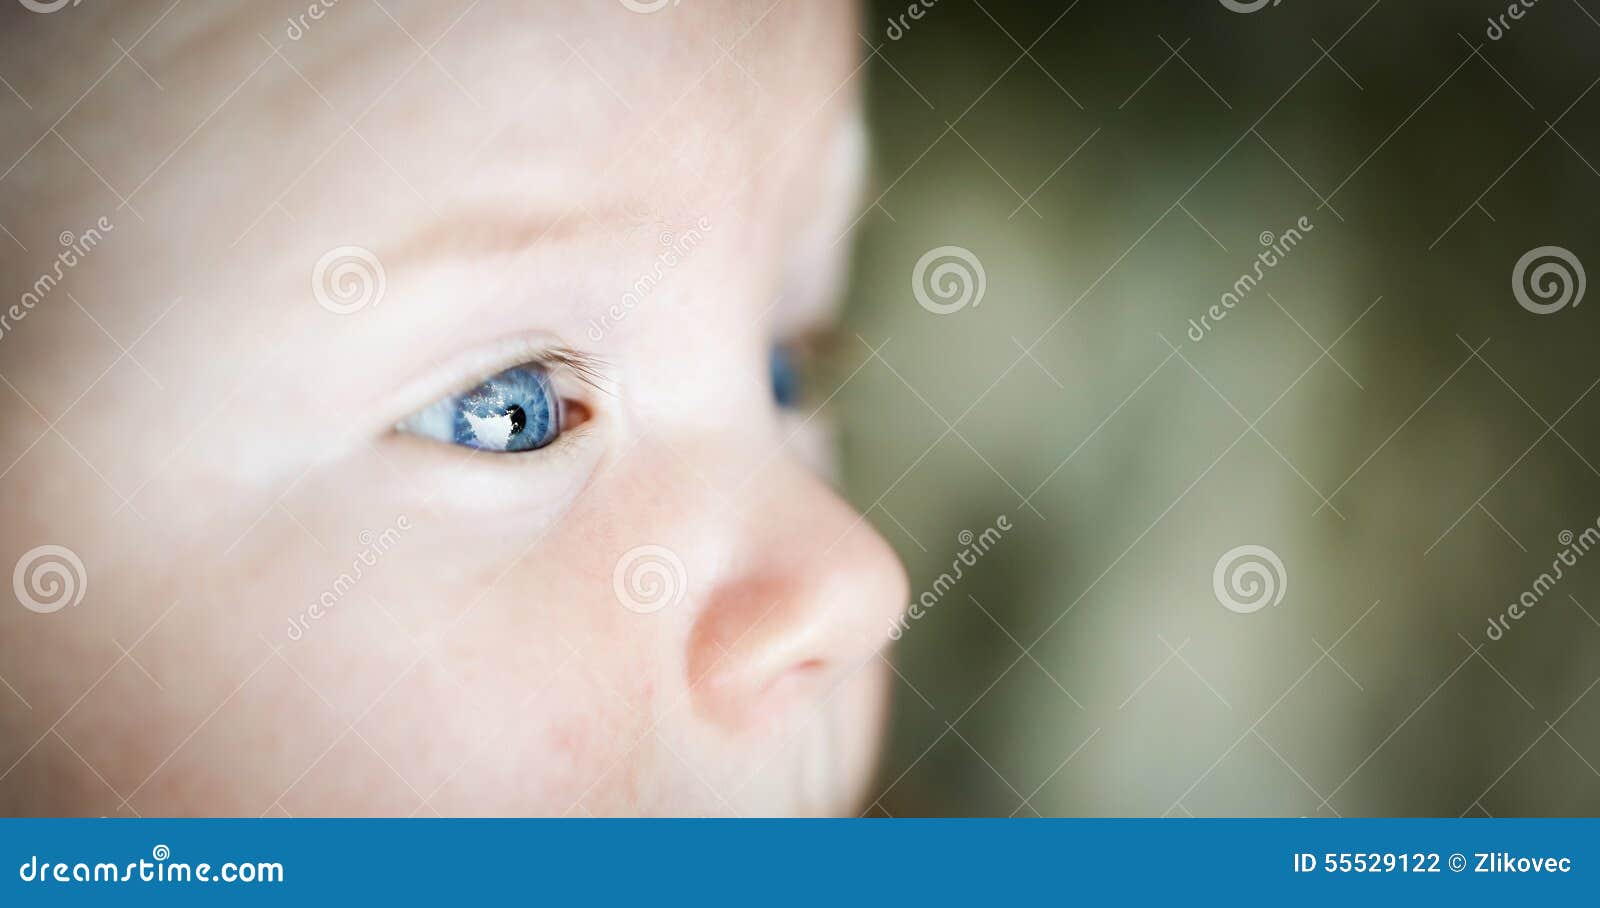 curious baby with blue eyes observing the surroundings